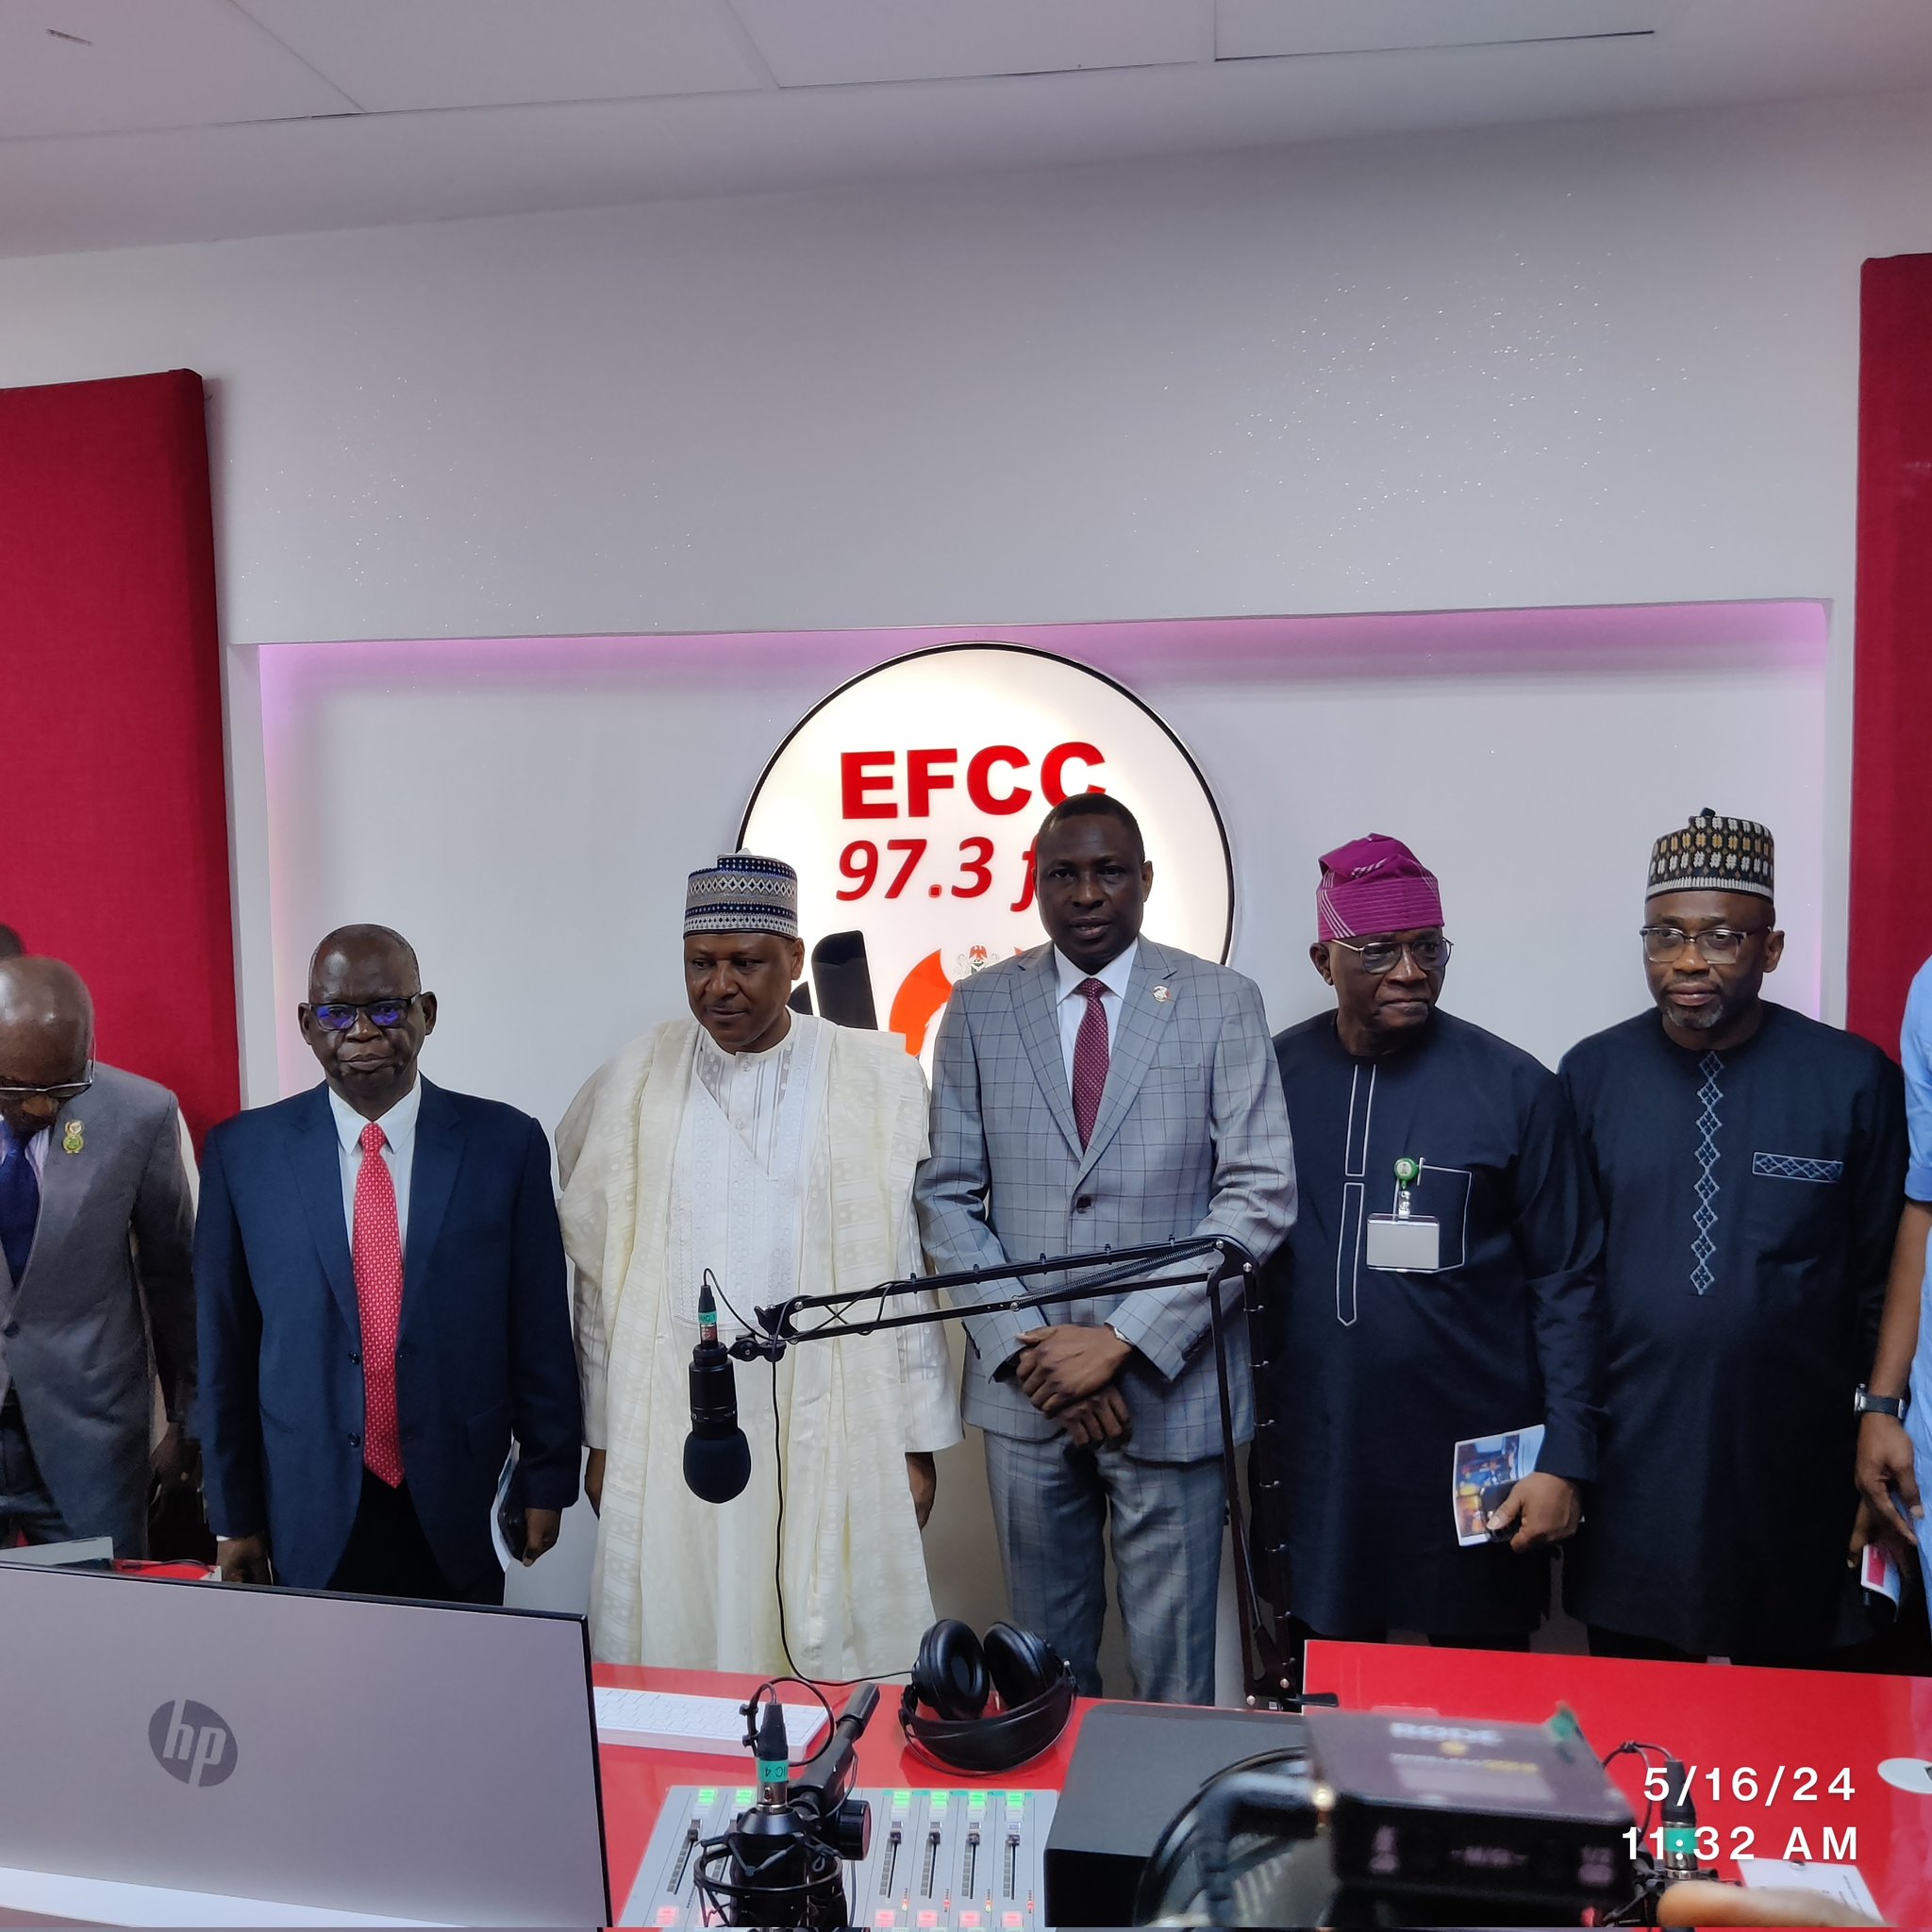 EFCC Nigeria on X: "HM of Information & National Orientation featured as a  guest on the newly commissioned EFCC Radio 97.3FM, following the tour of  the facilities of the radio station. #TowardsABetterNigeria #